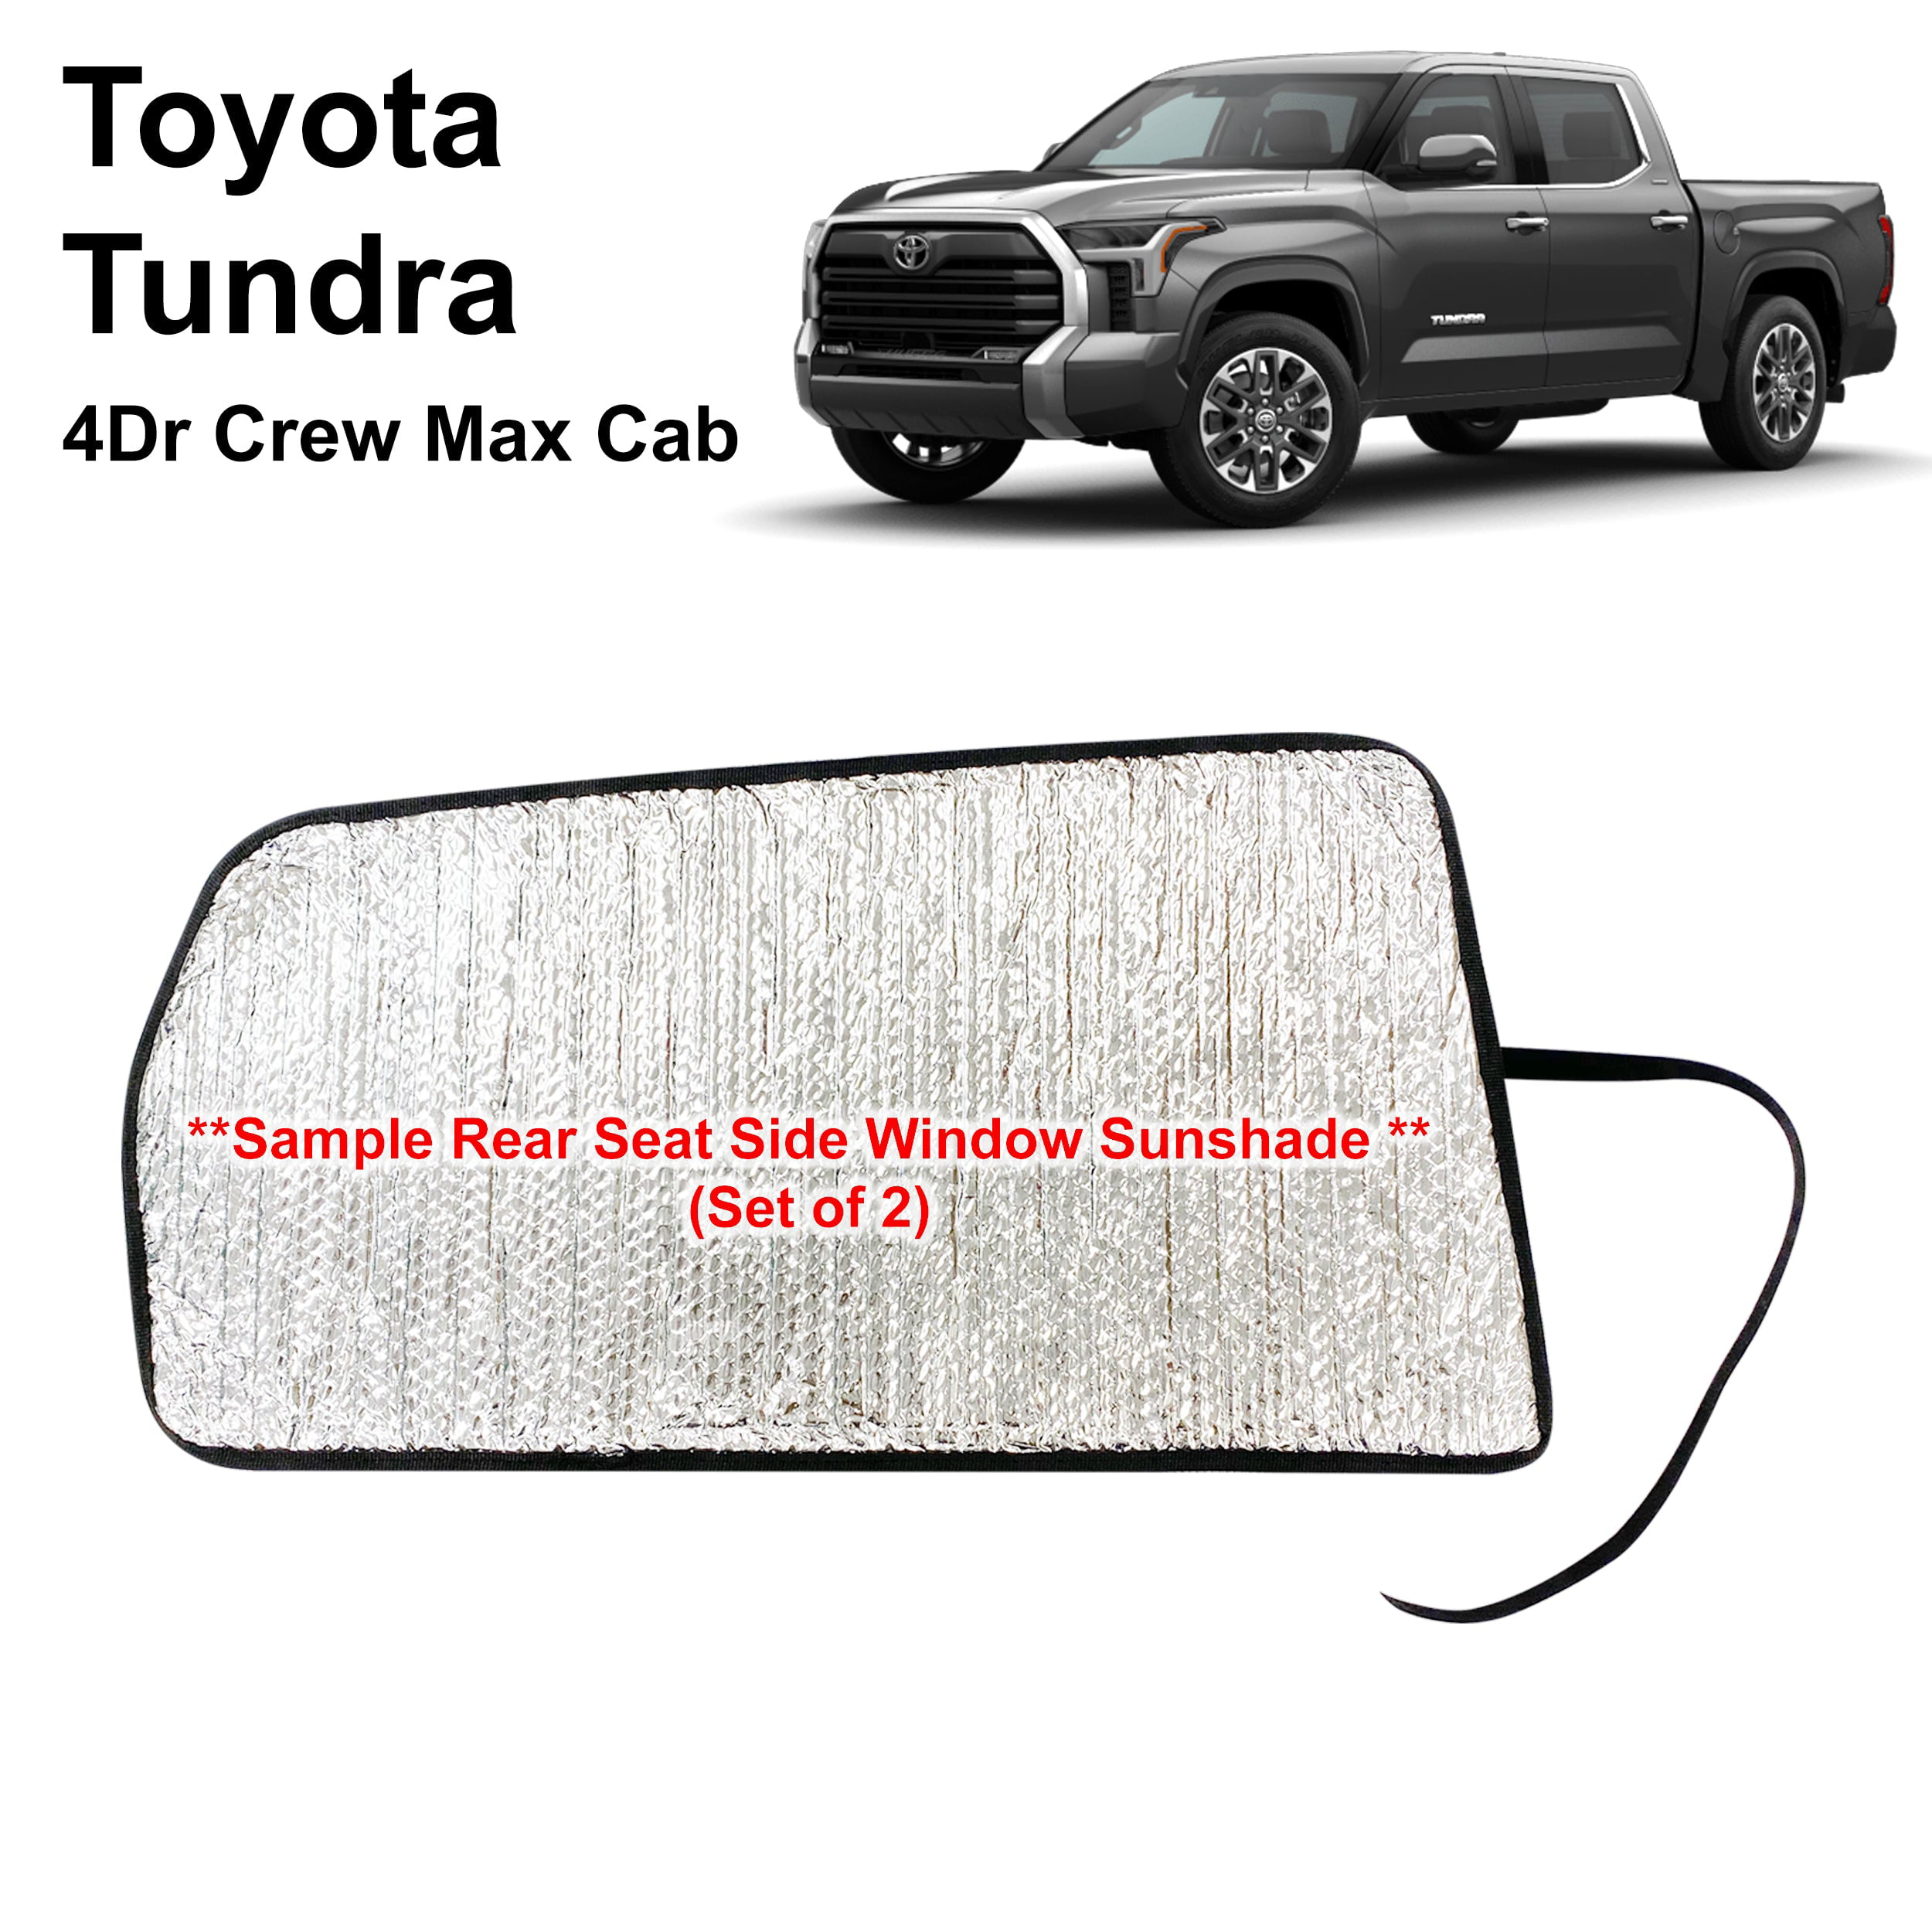 Custom Fit Windshield Sunshade for Toyota Tundra 1999 to 2006 std cab andx-cab 